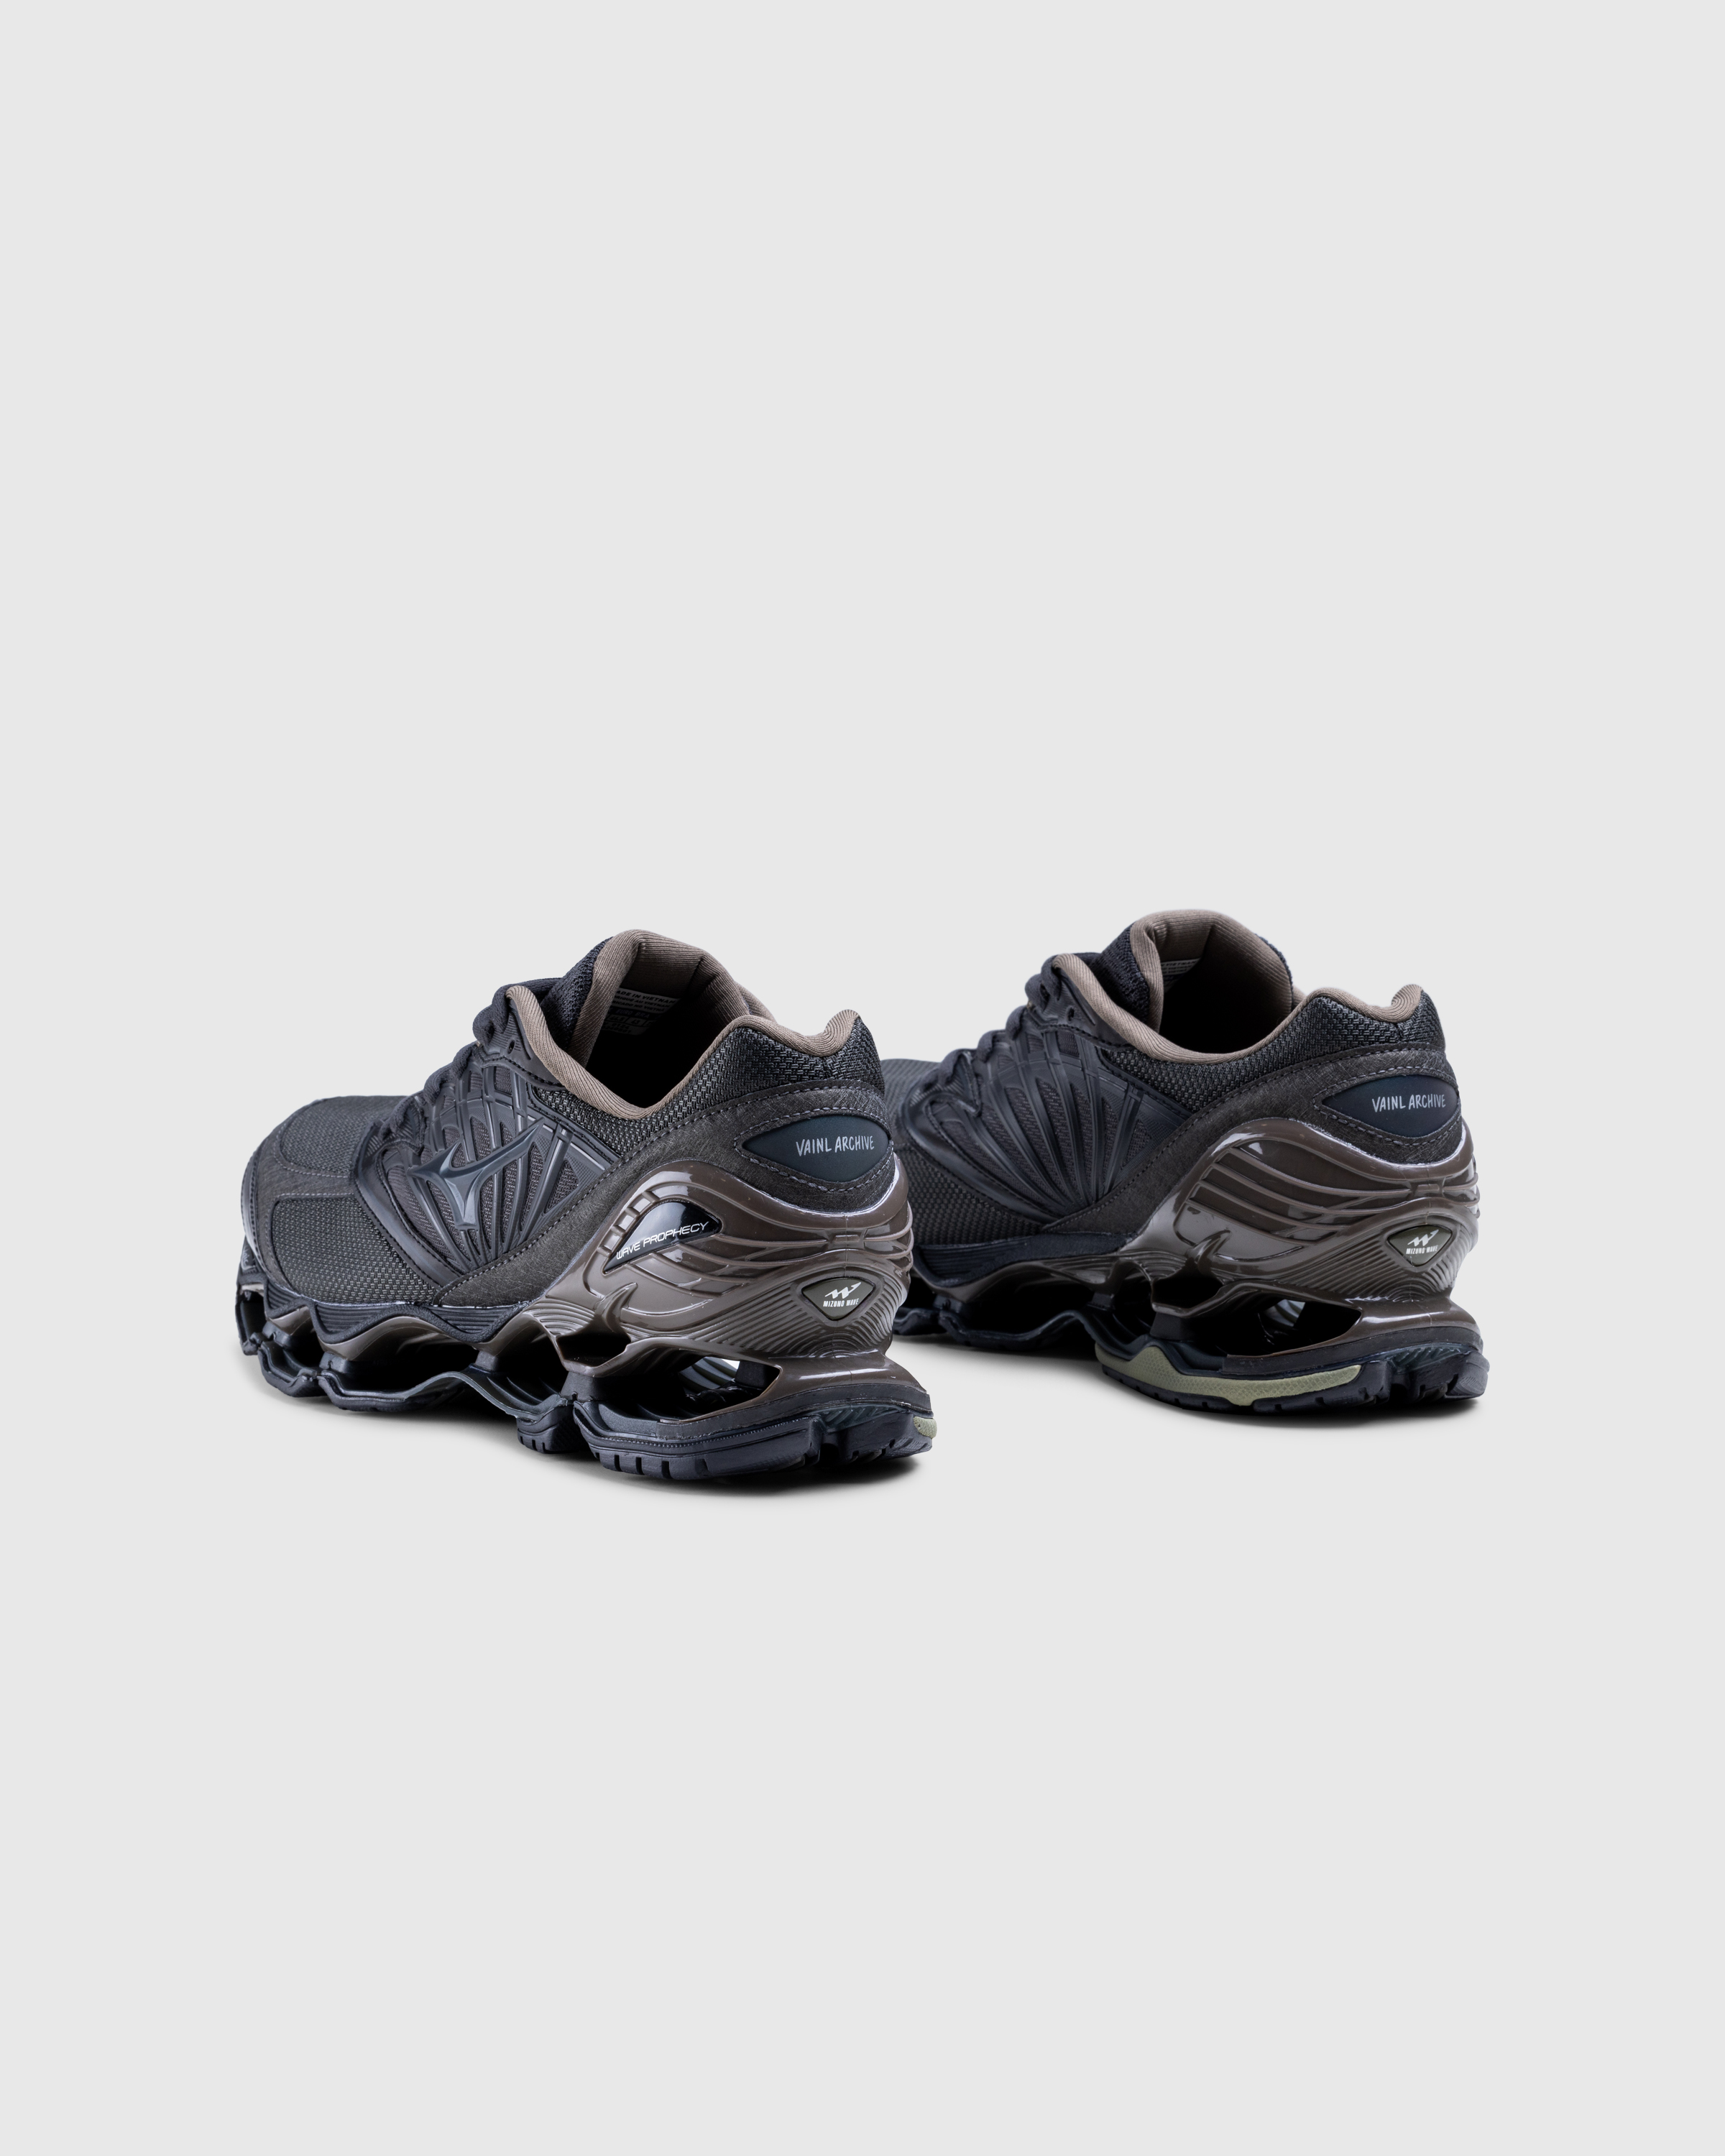 Mizuno – Wave Prophecy LS VAINL ARCHIVE Pirate Black/Chocolate Brown - Low Top Sneakers - Black - Image 5